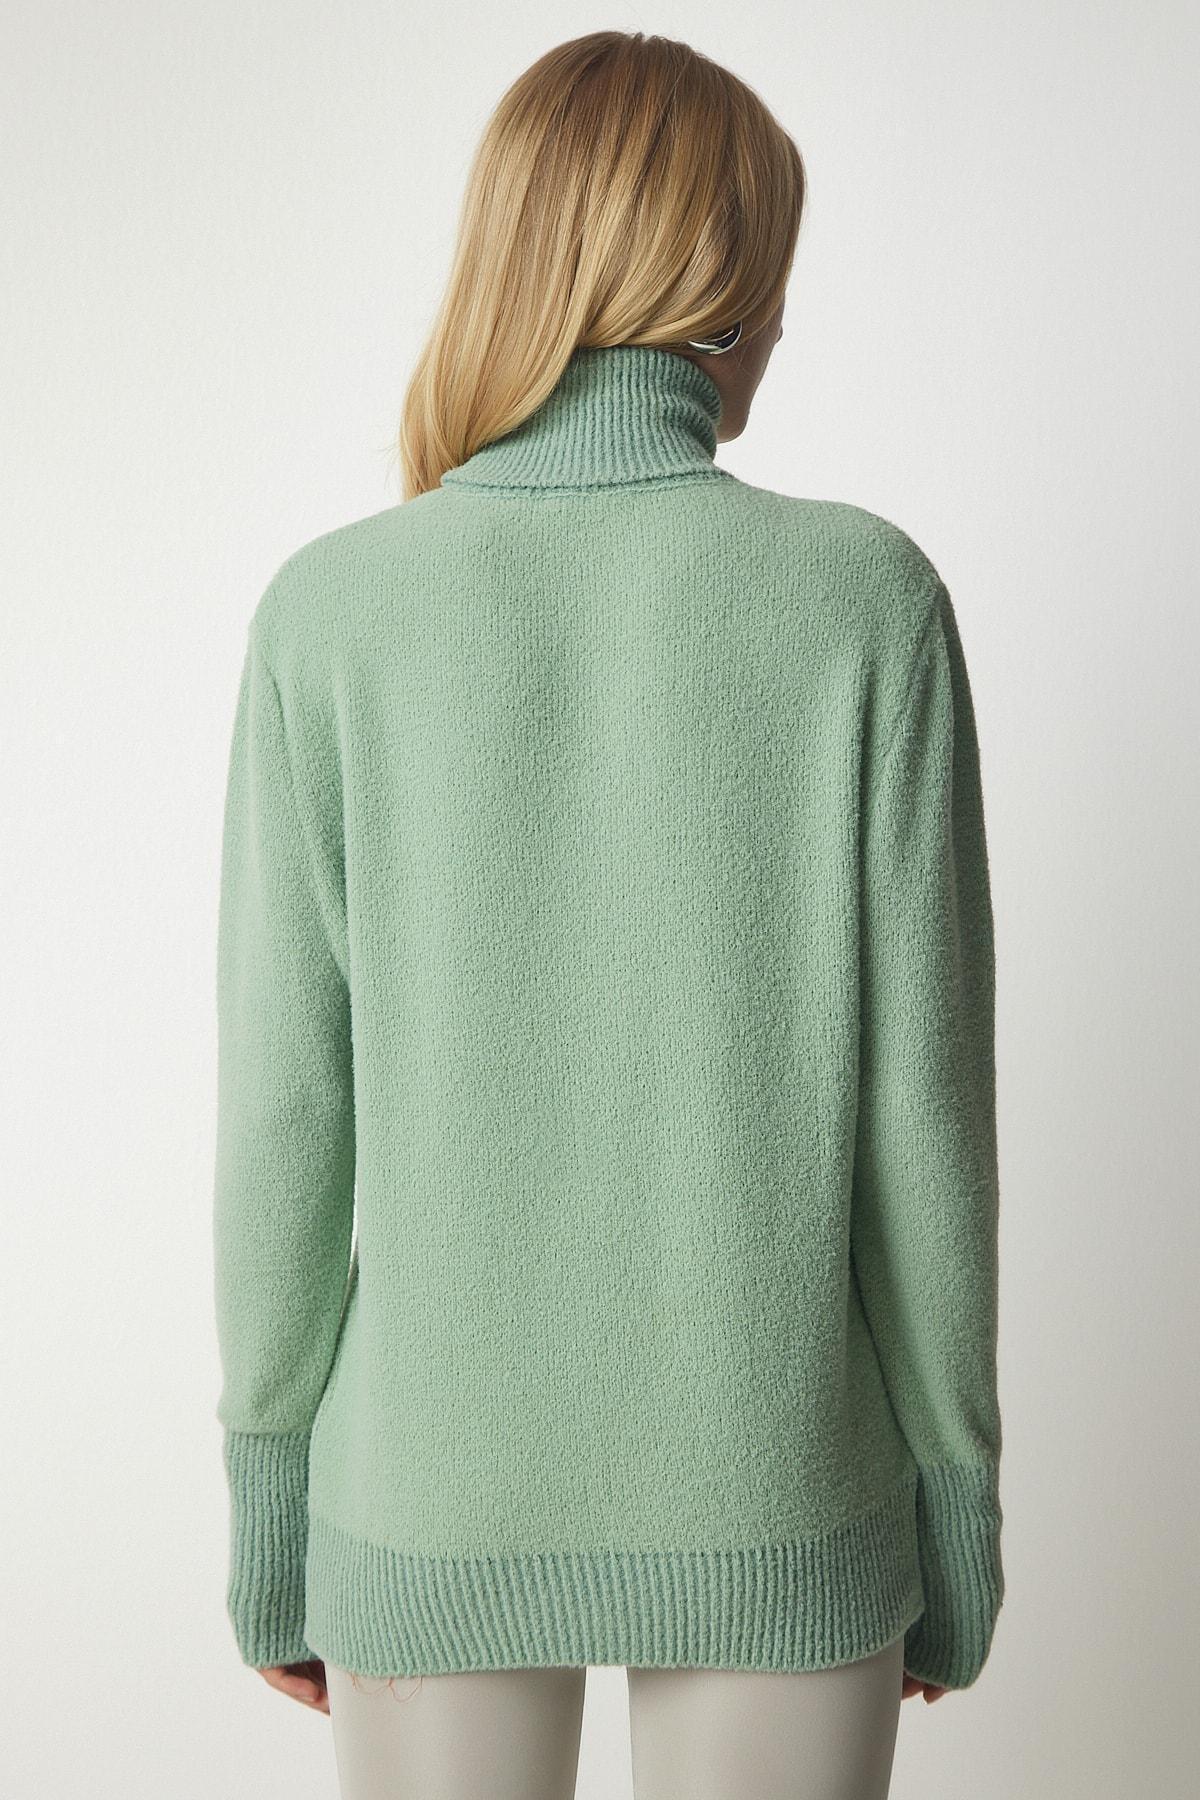 Happiness Istanbul - Green Turtleneck Soft Textured Knitwear Sweater